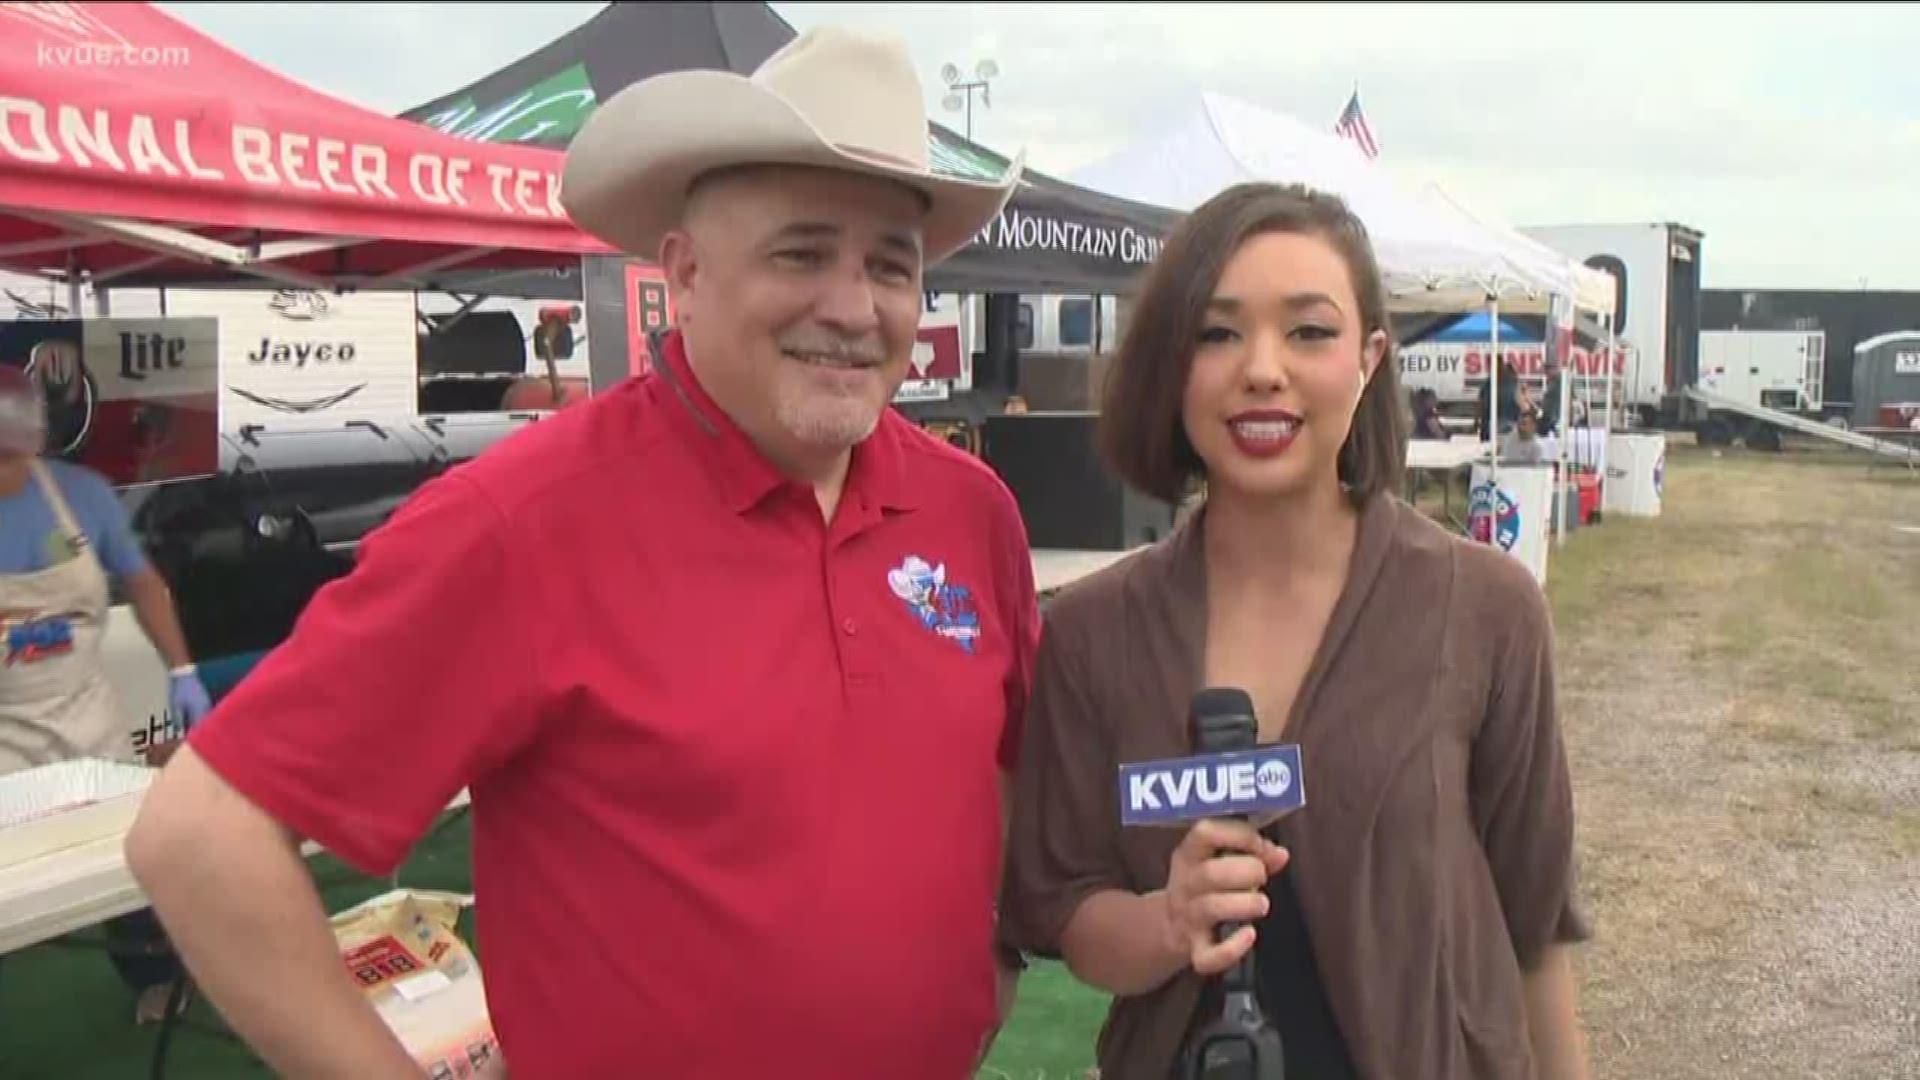 Barbecue cookoff held at Rodeo Austin